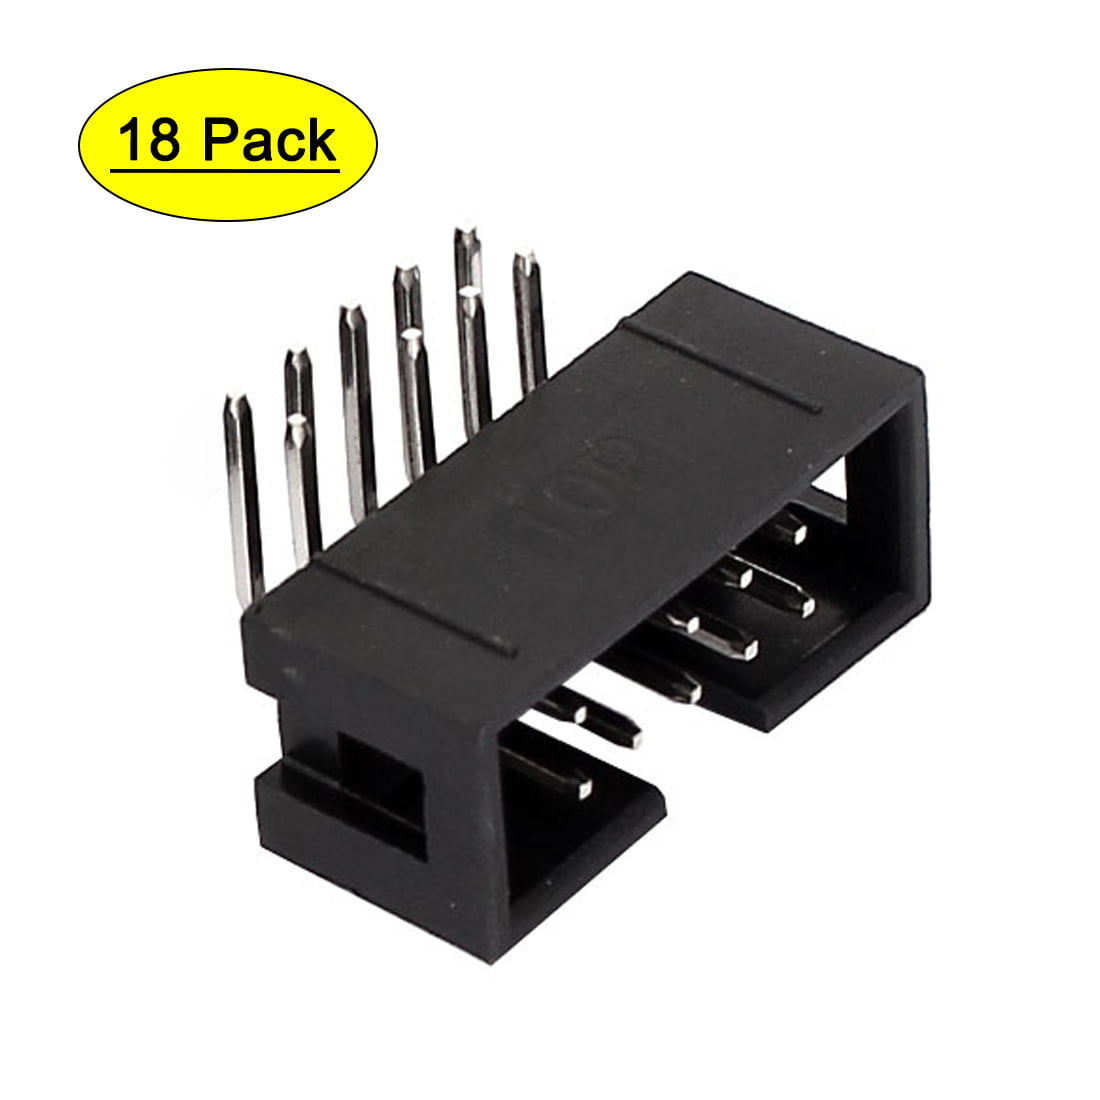 1st CLASS POST Right Angle 10 Way IDC Box Header Connector 2.54mm 5 Pack